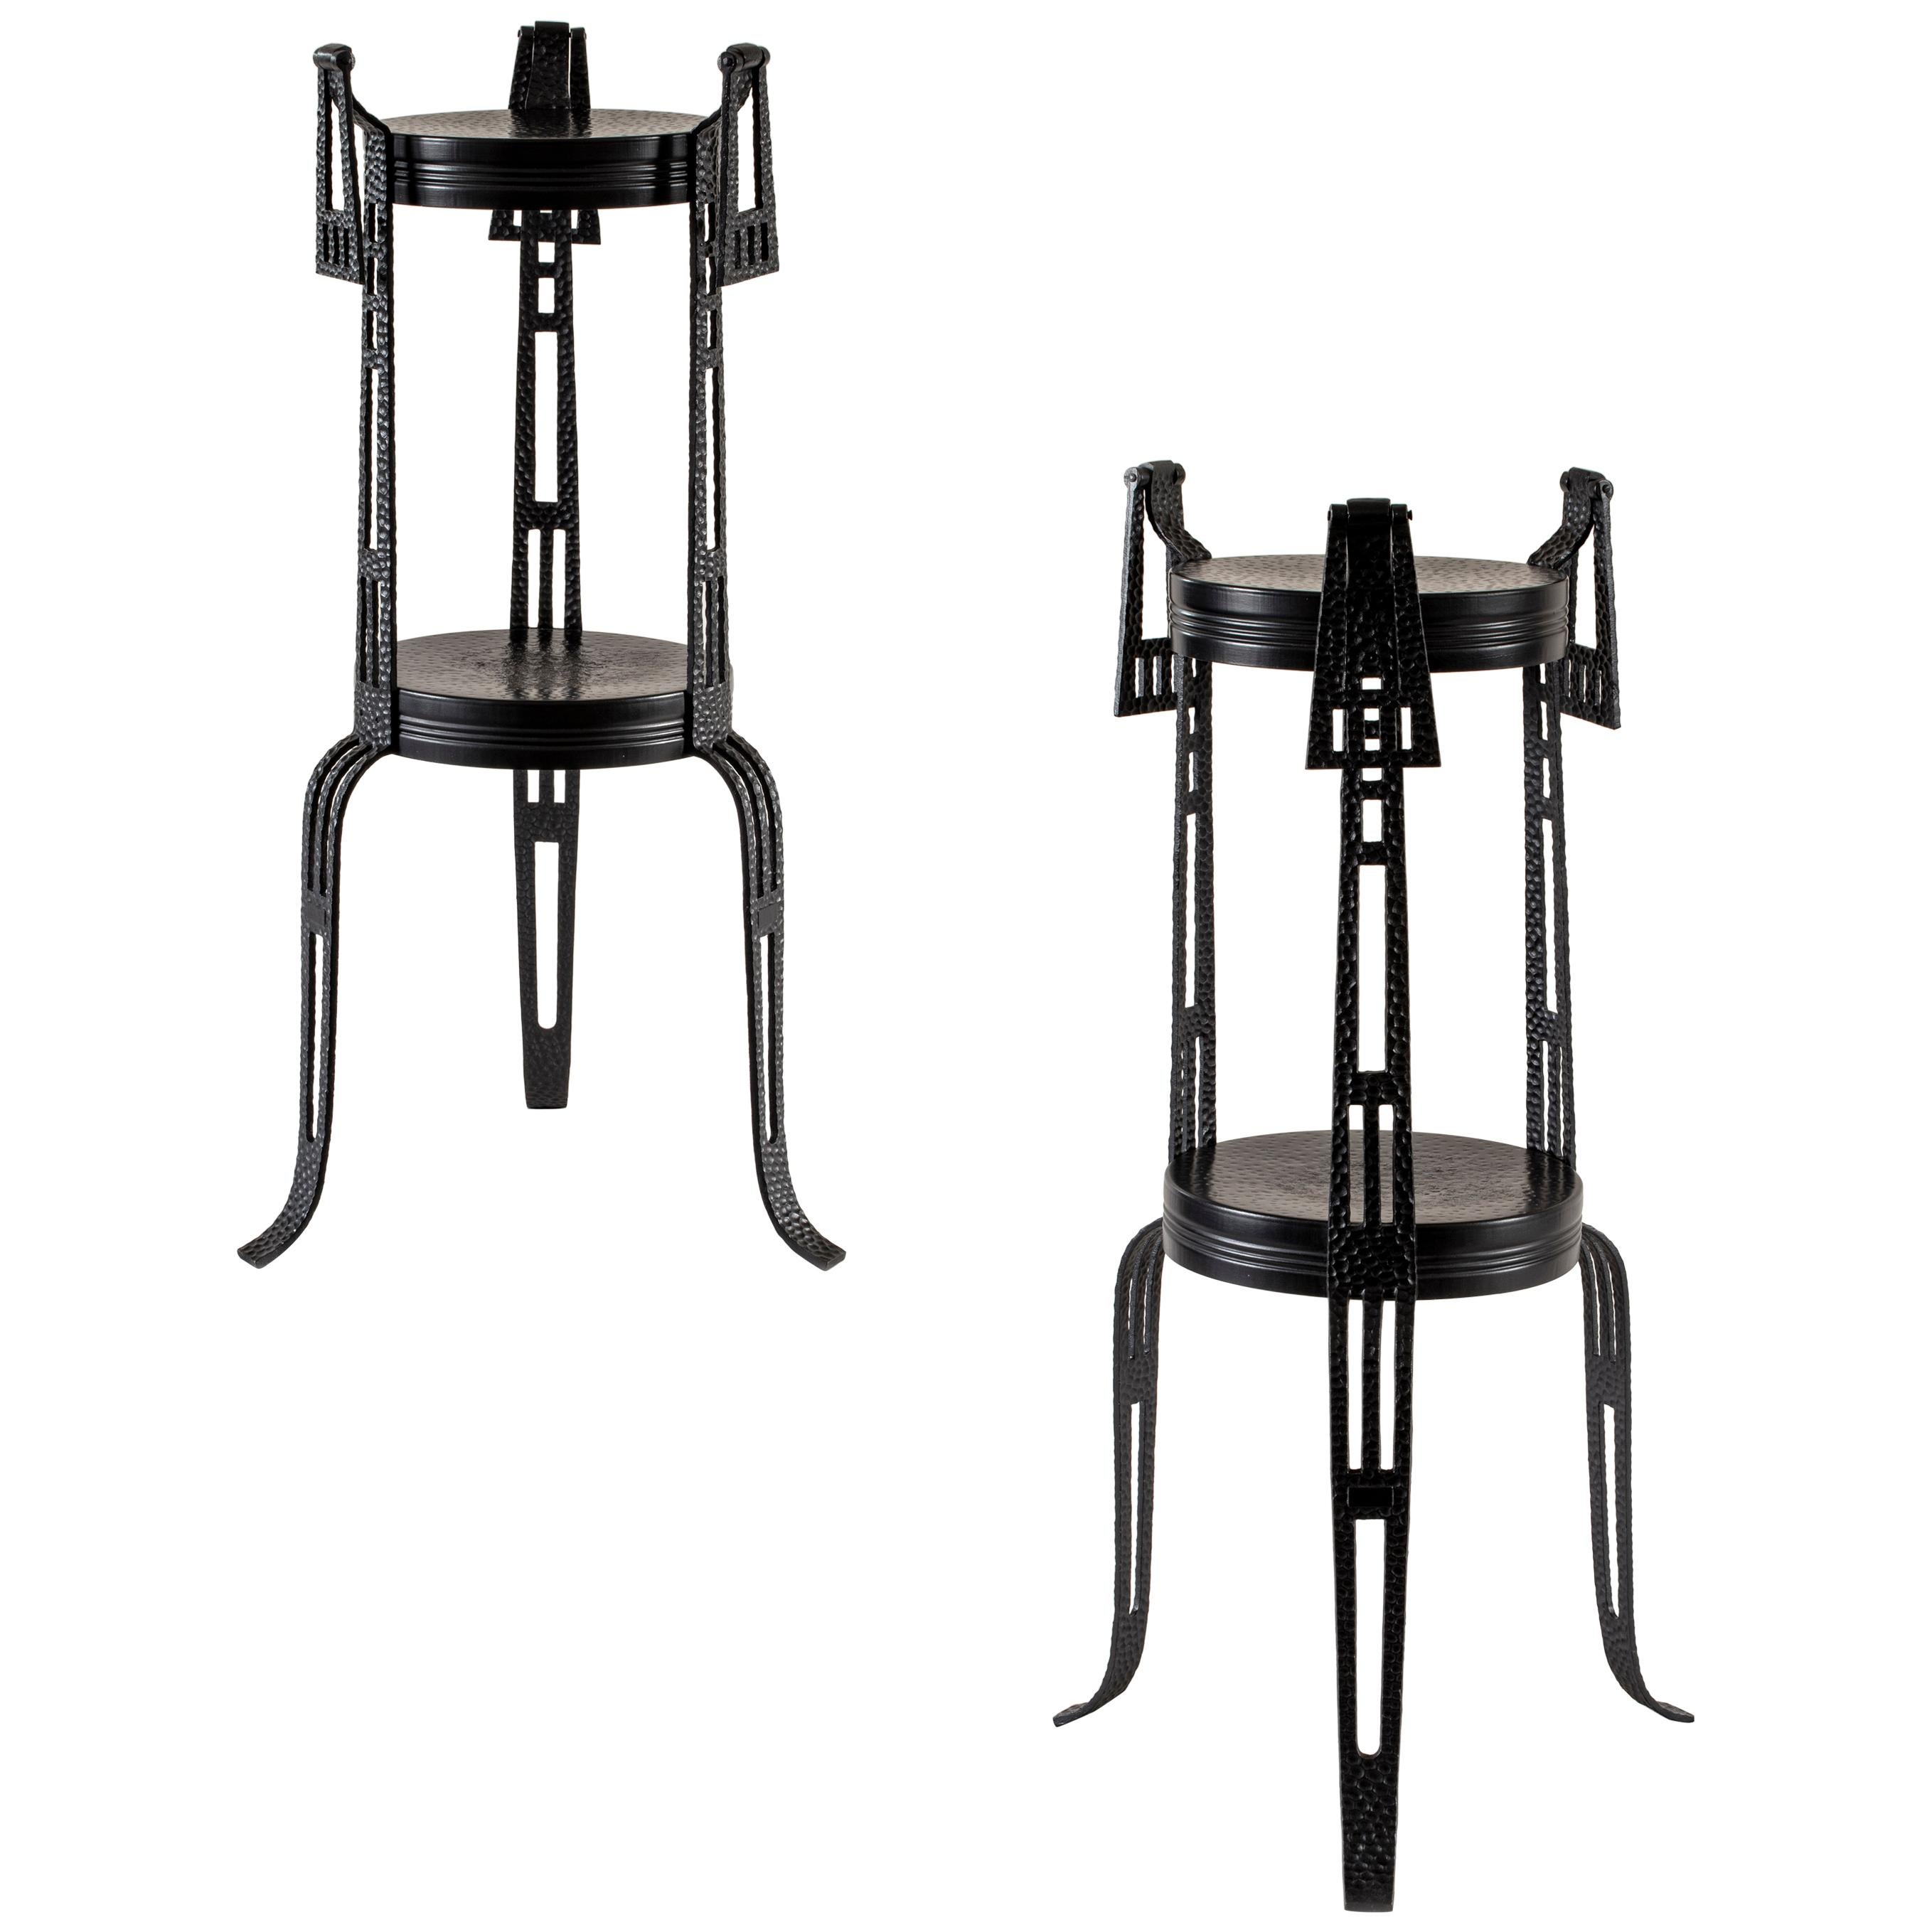 Pair of Early 20th Century Swedish Wrought Iron Pedestals / Plant Stands